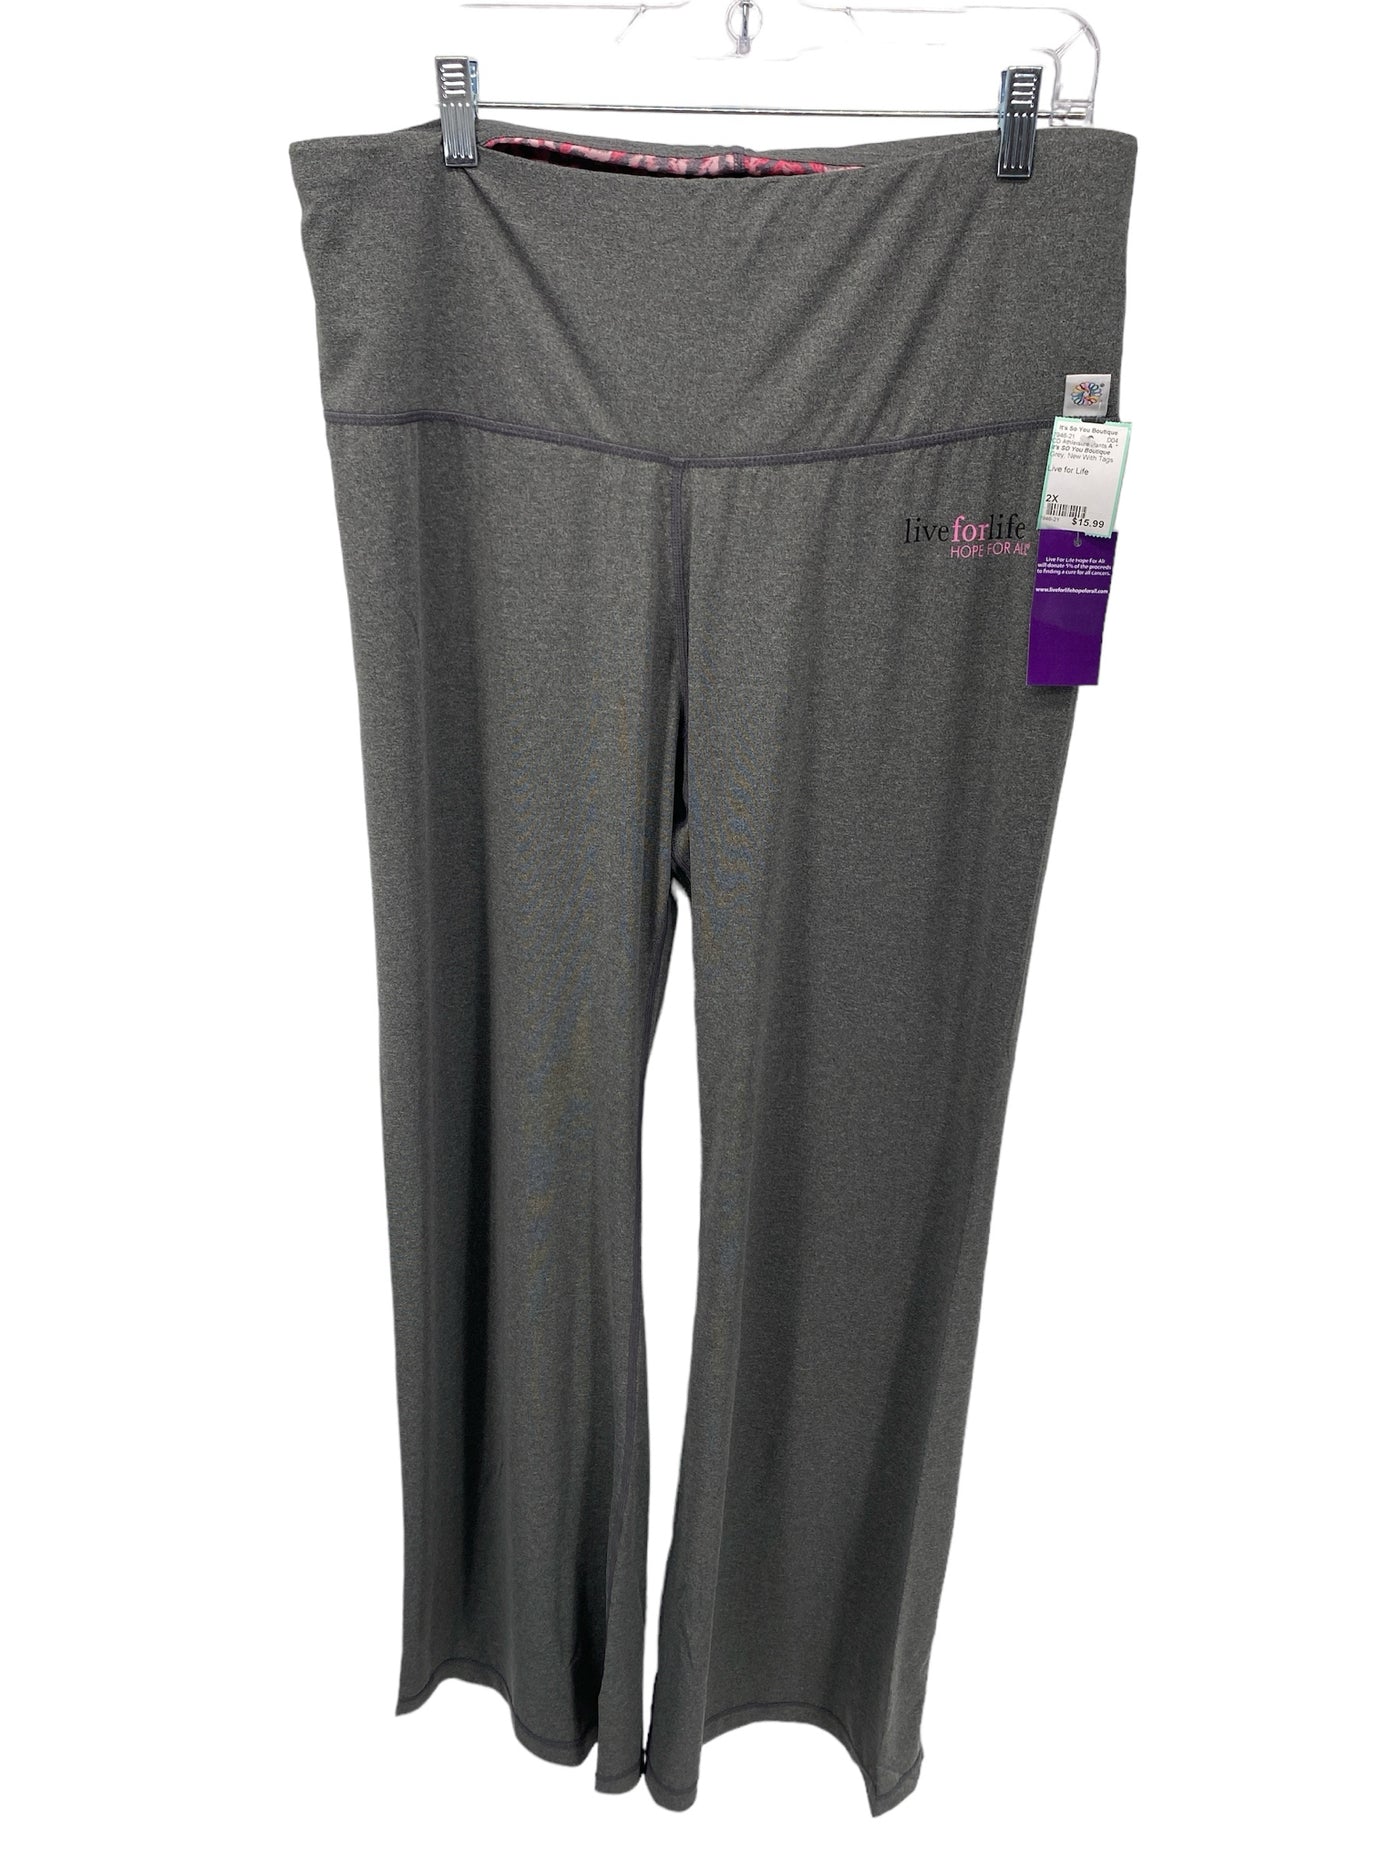 It's SO You Boutique Women Size 2X Grey New With Tags CD Athleisure Pants